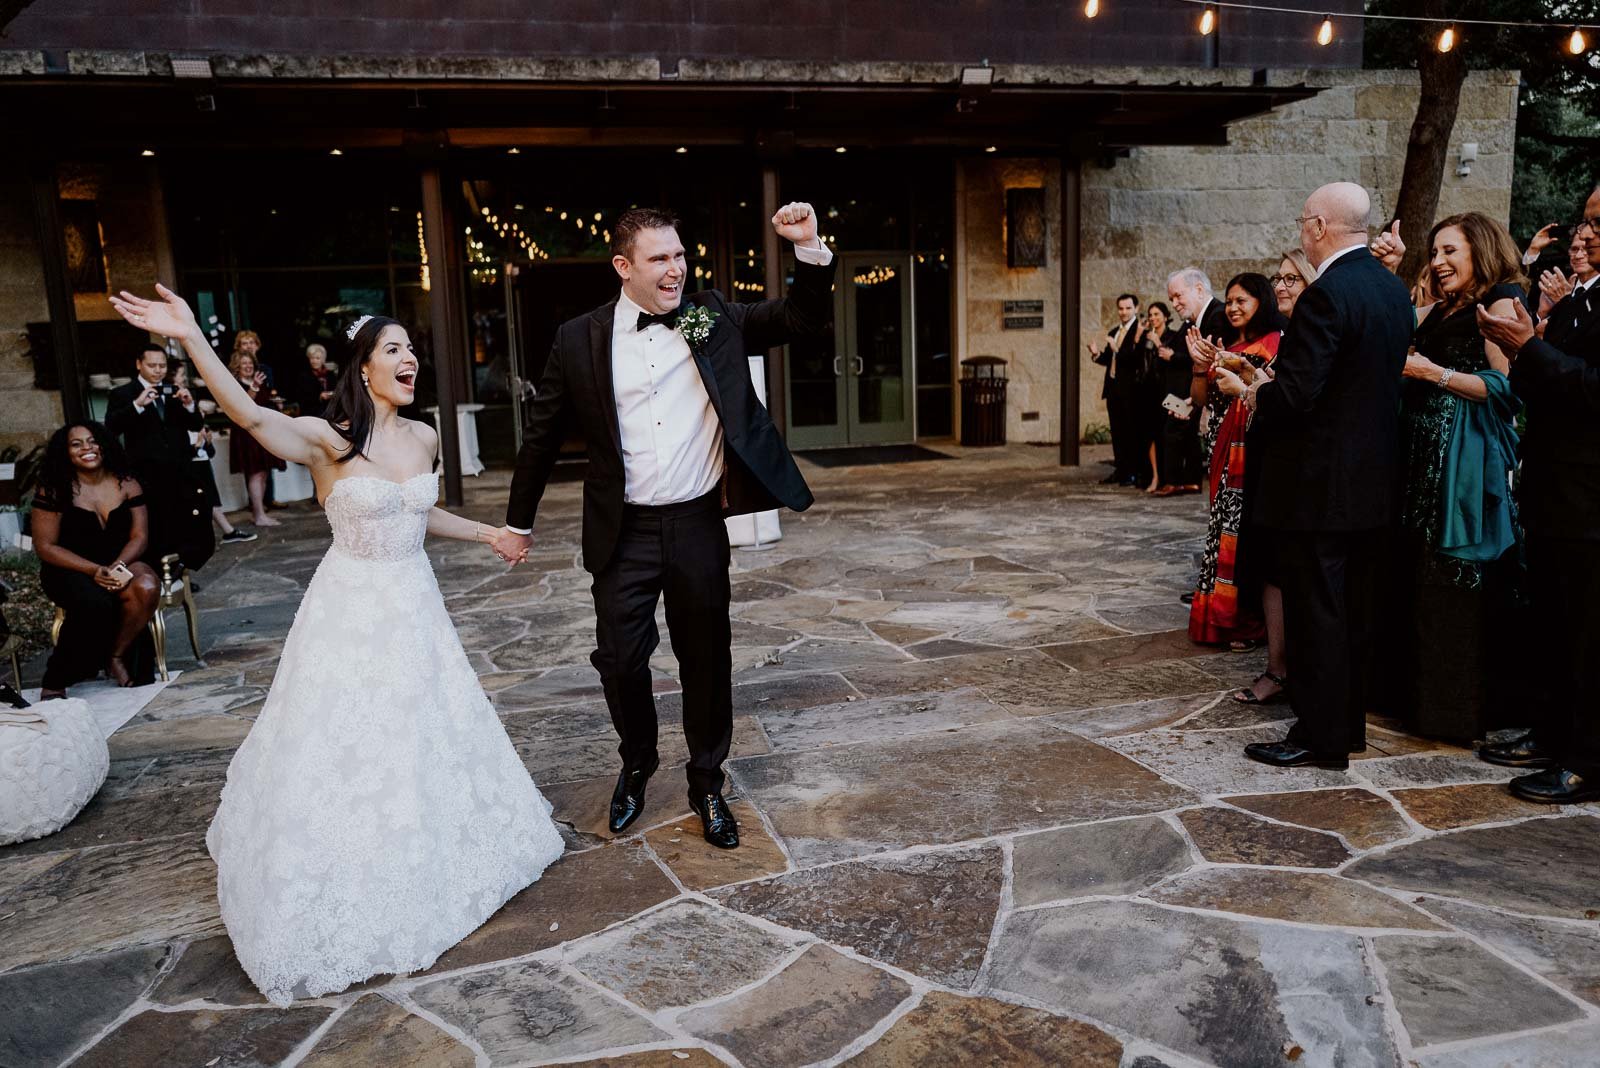 A newly married couple jubiantly raise their hands entering the Jack Guenther Pavilion at Briscoe Western Art Museum Wedding Receptionding Texas Leica Wedding Photographer Philip Thomas